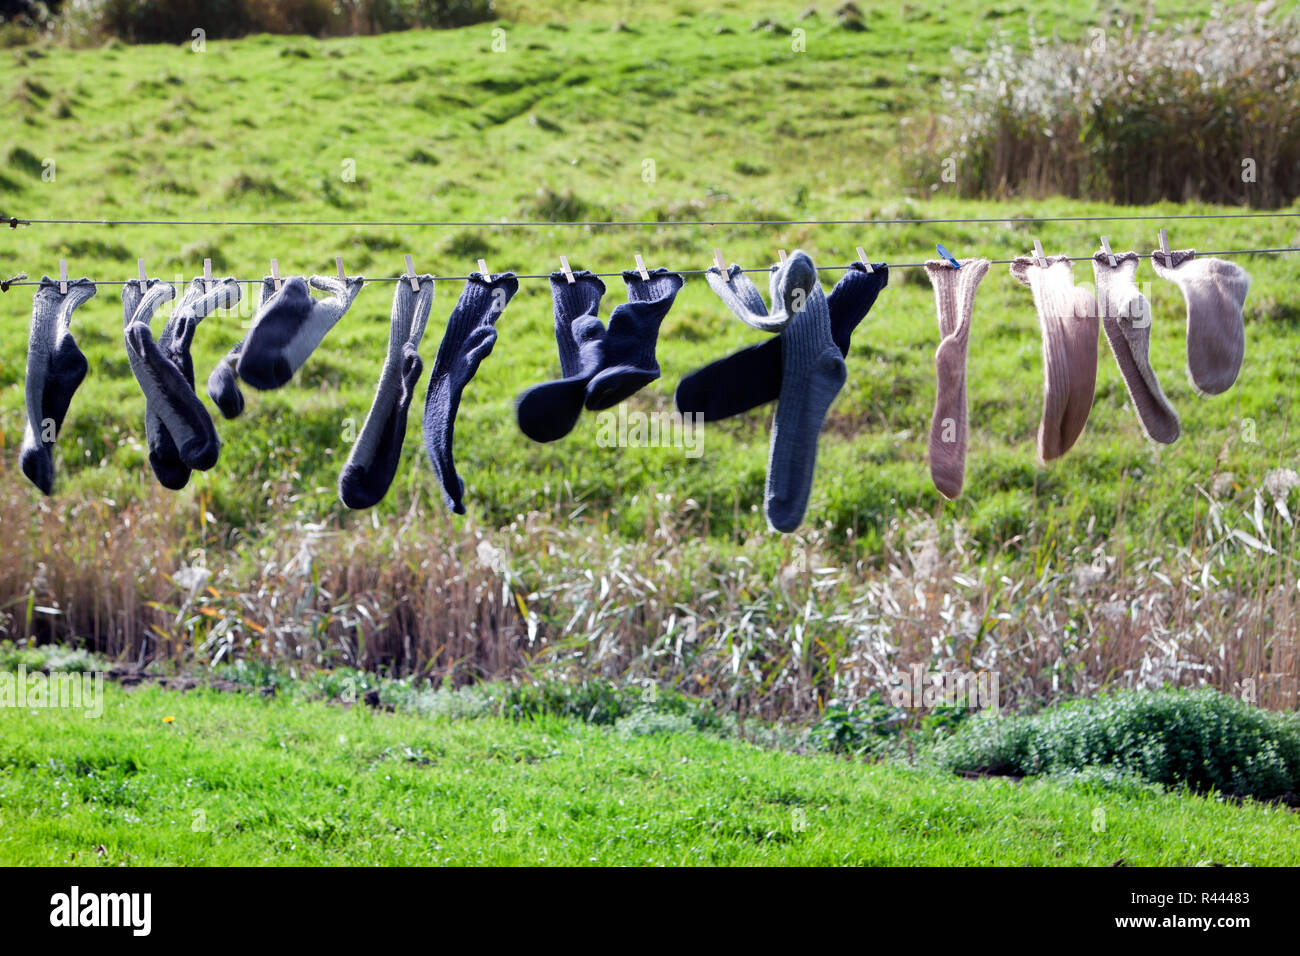 Clothesline with socks drying in the wind Stock Photo